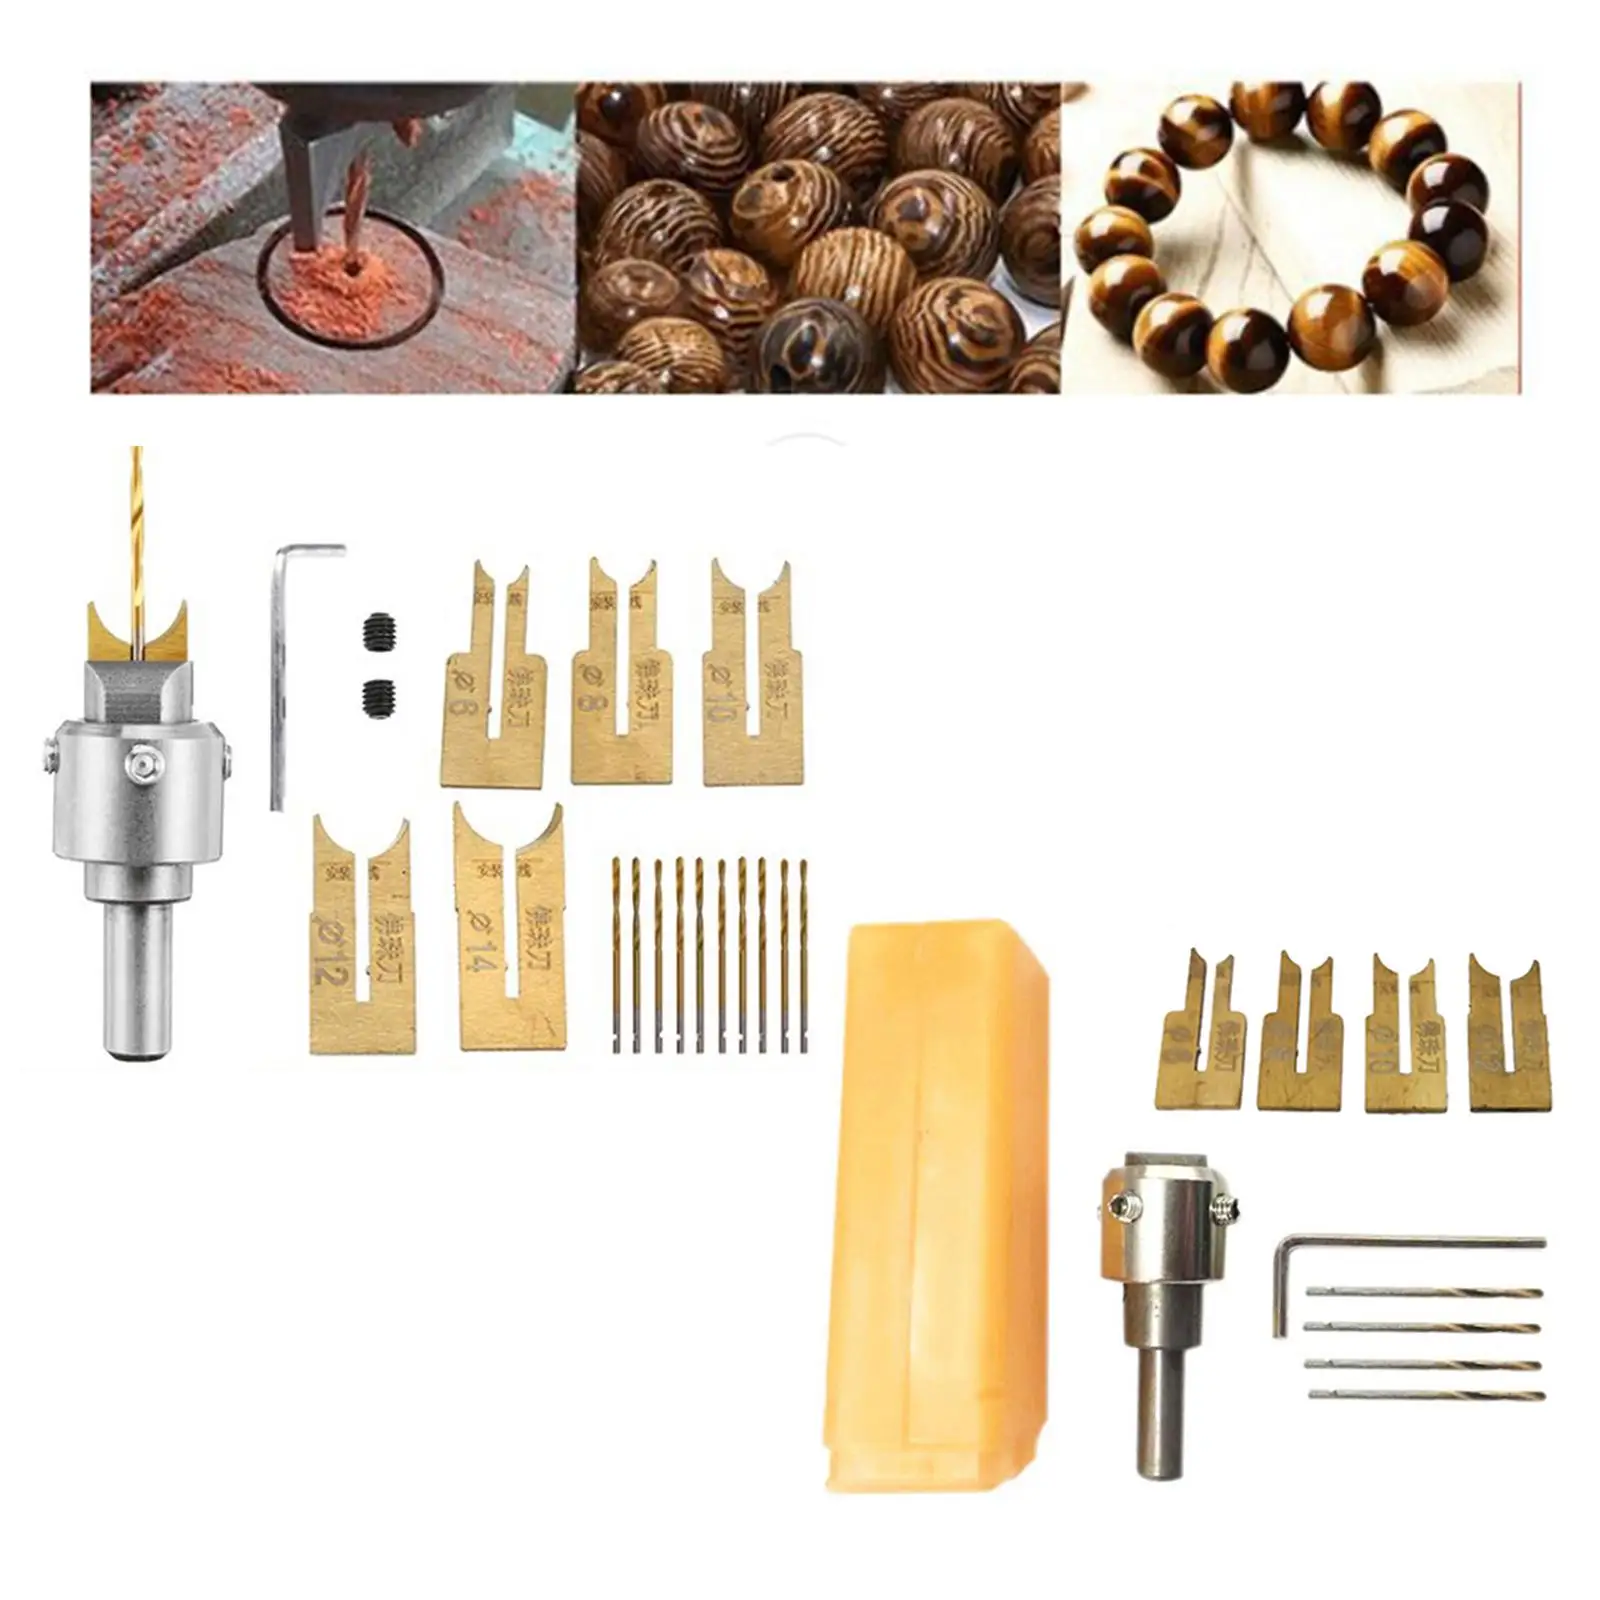 Wooden Beads Drill Bits Wood Bead Maker Jewelry Making Milling Cutter Set